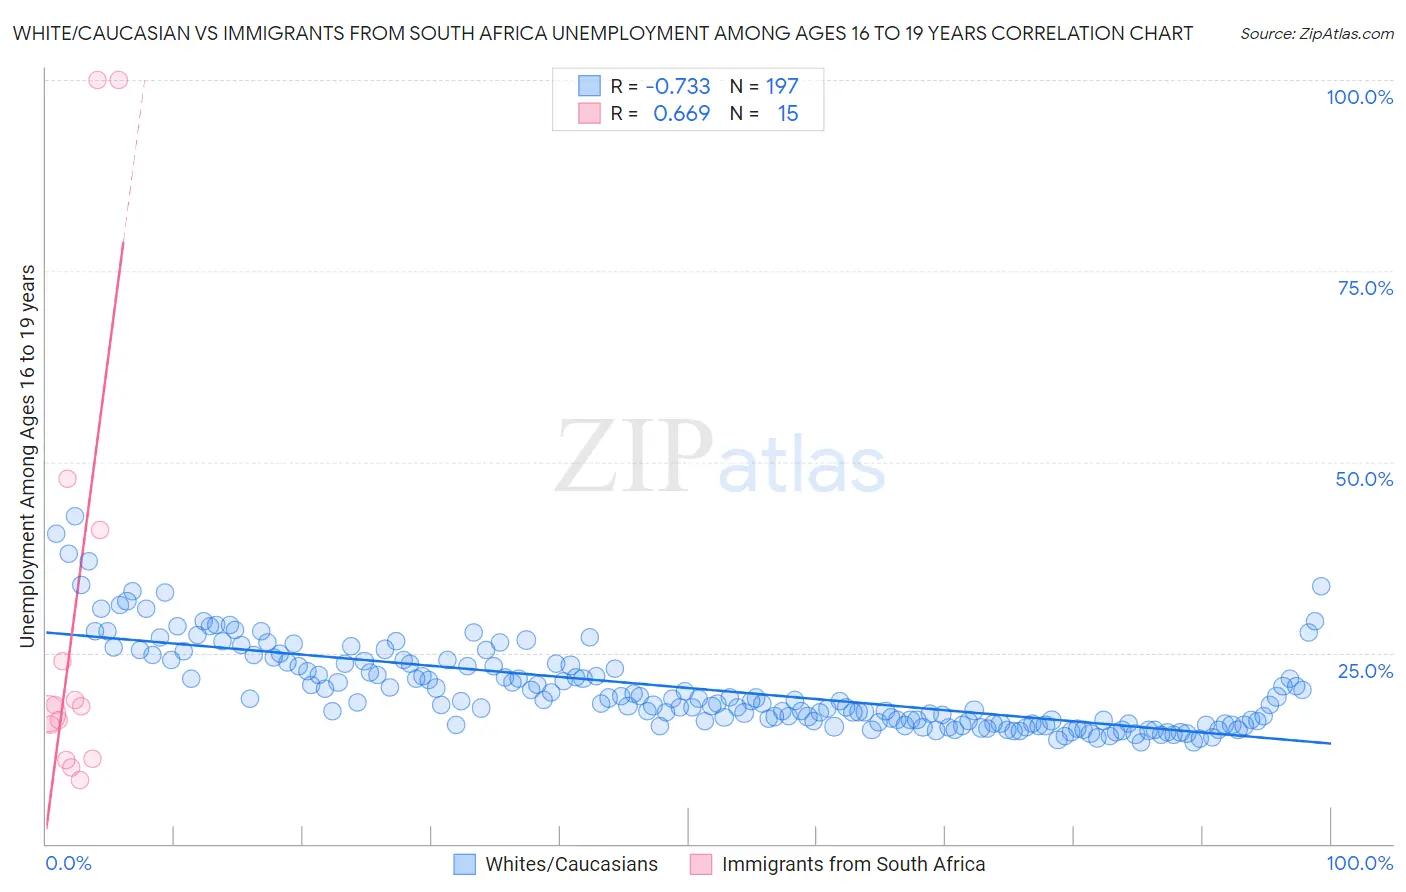 White/Caucasian vs Immigrants from South Africa Unemployment Among Ages 16 to 19 years